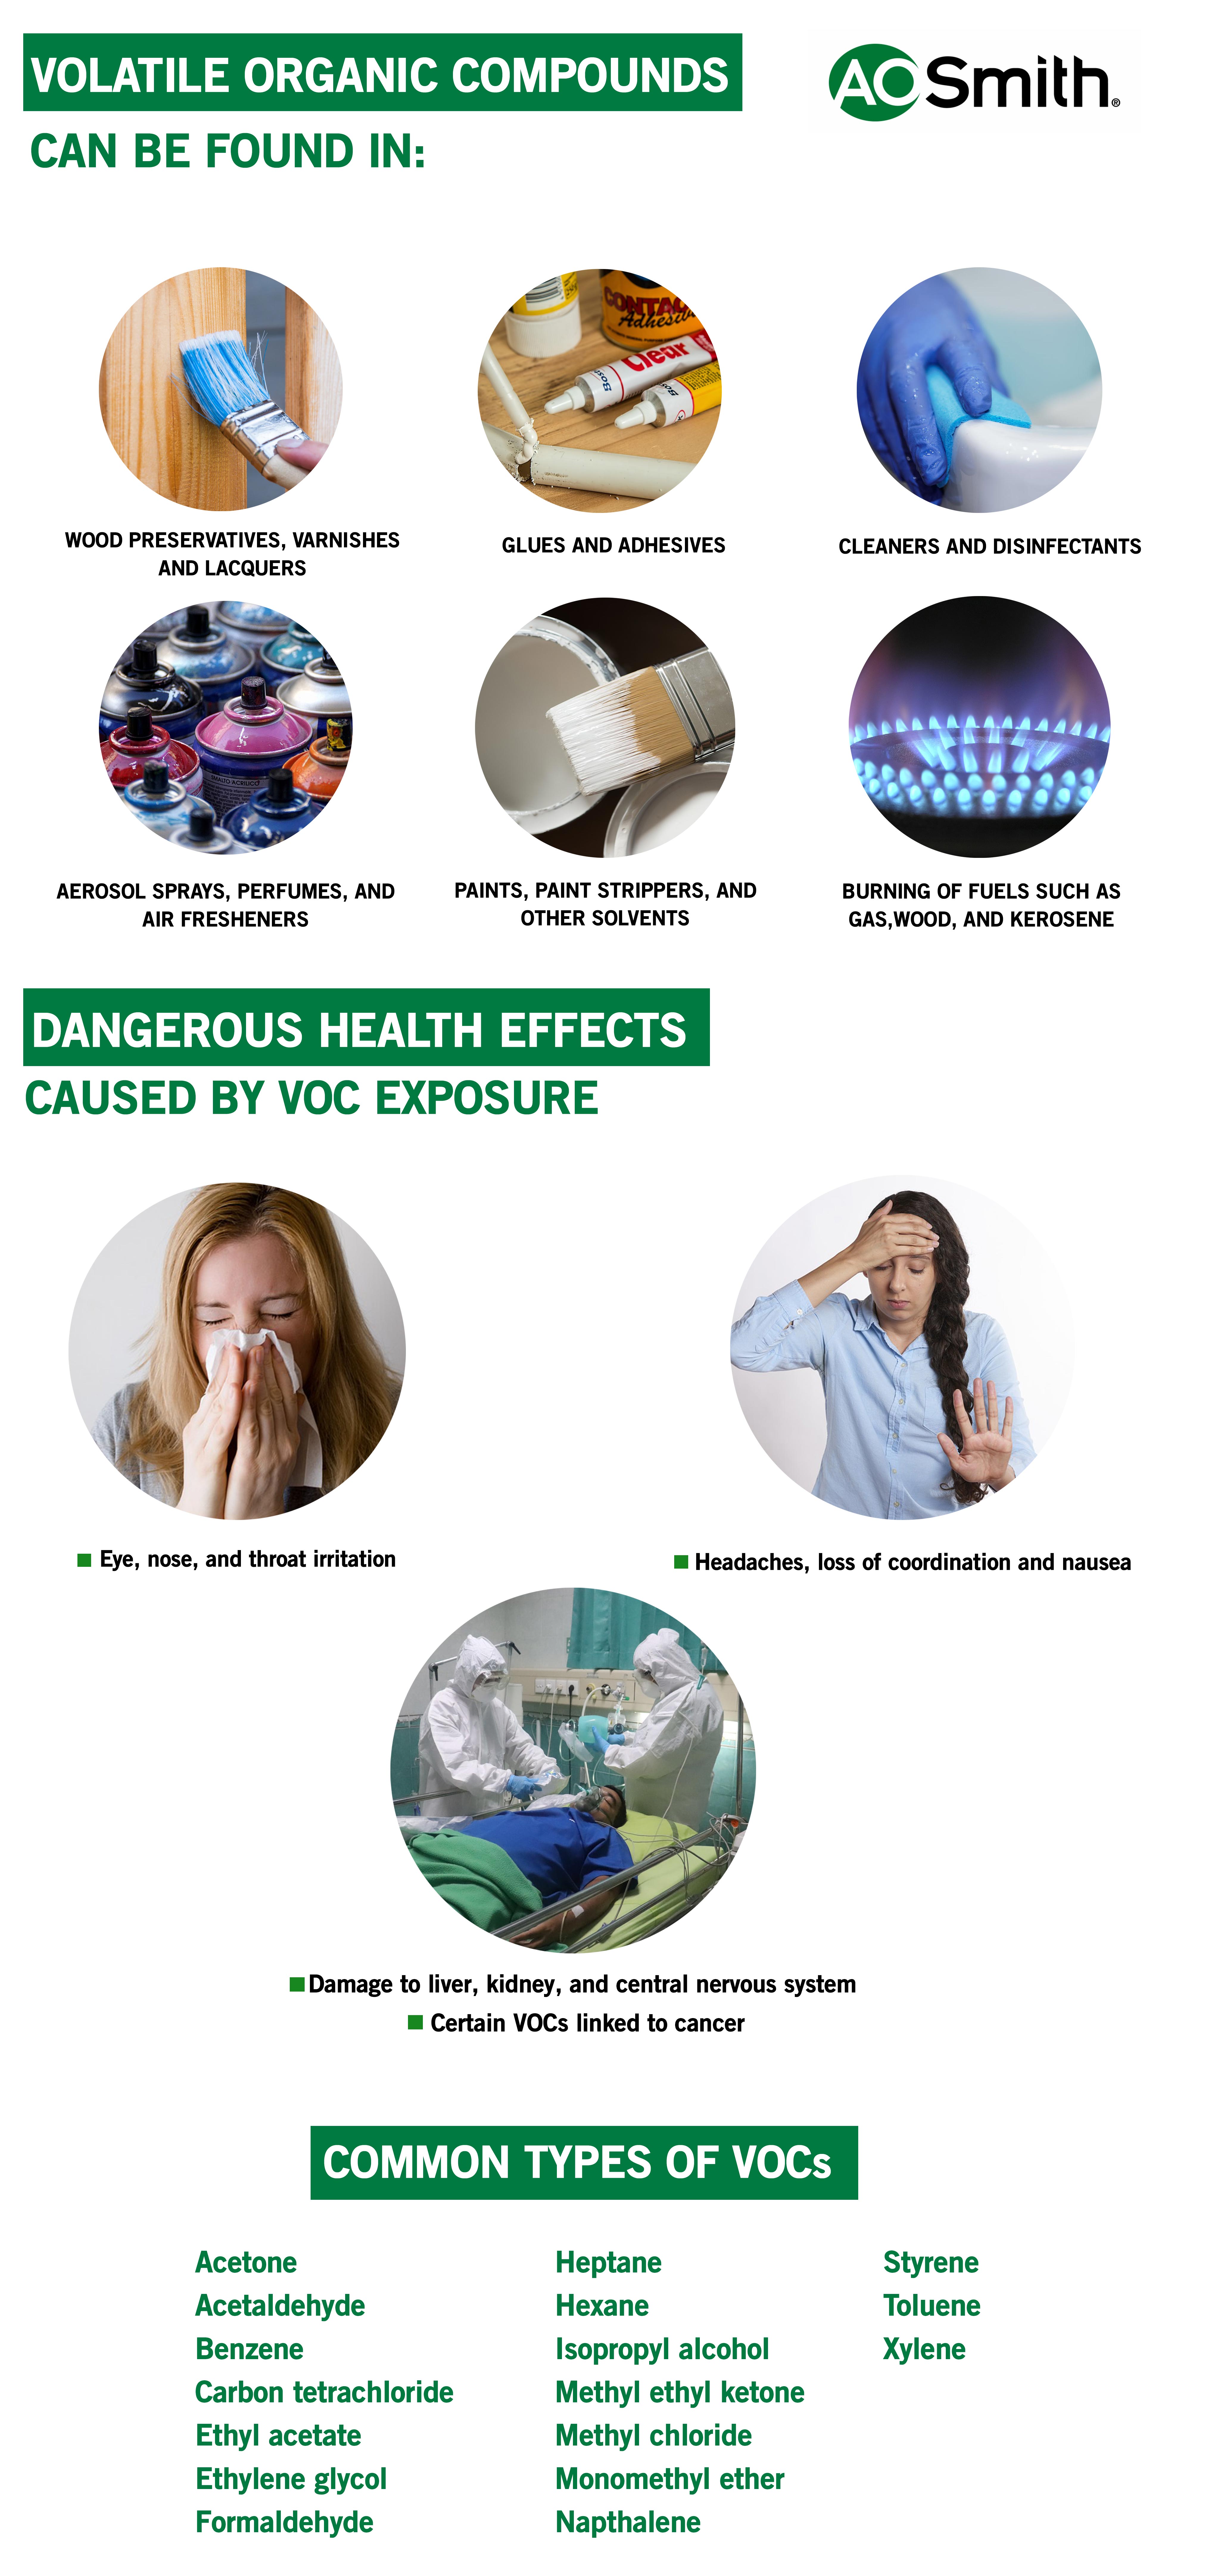 Volatile Organic Compounds and their health effects 